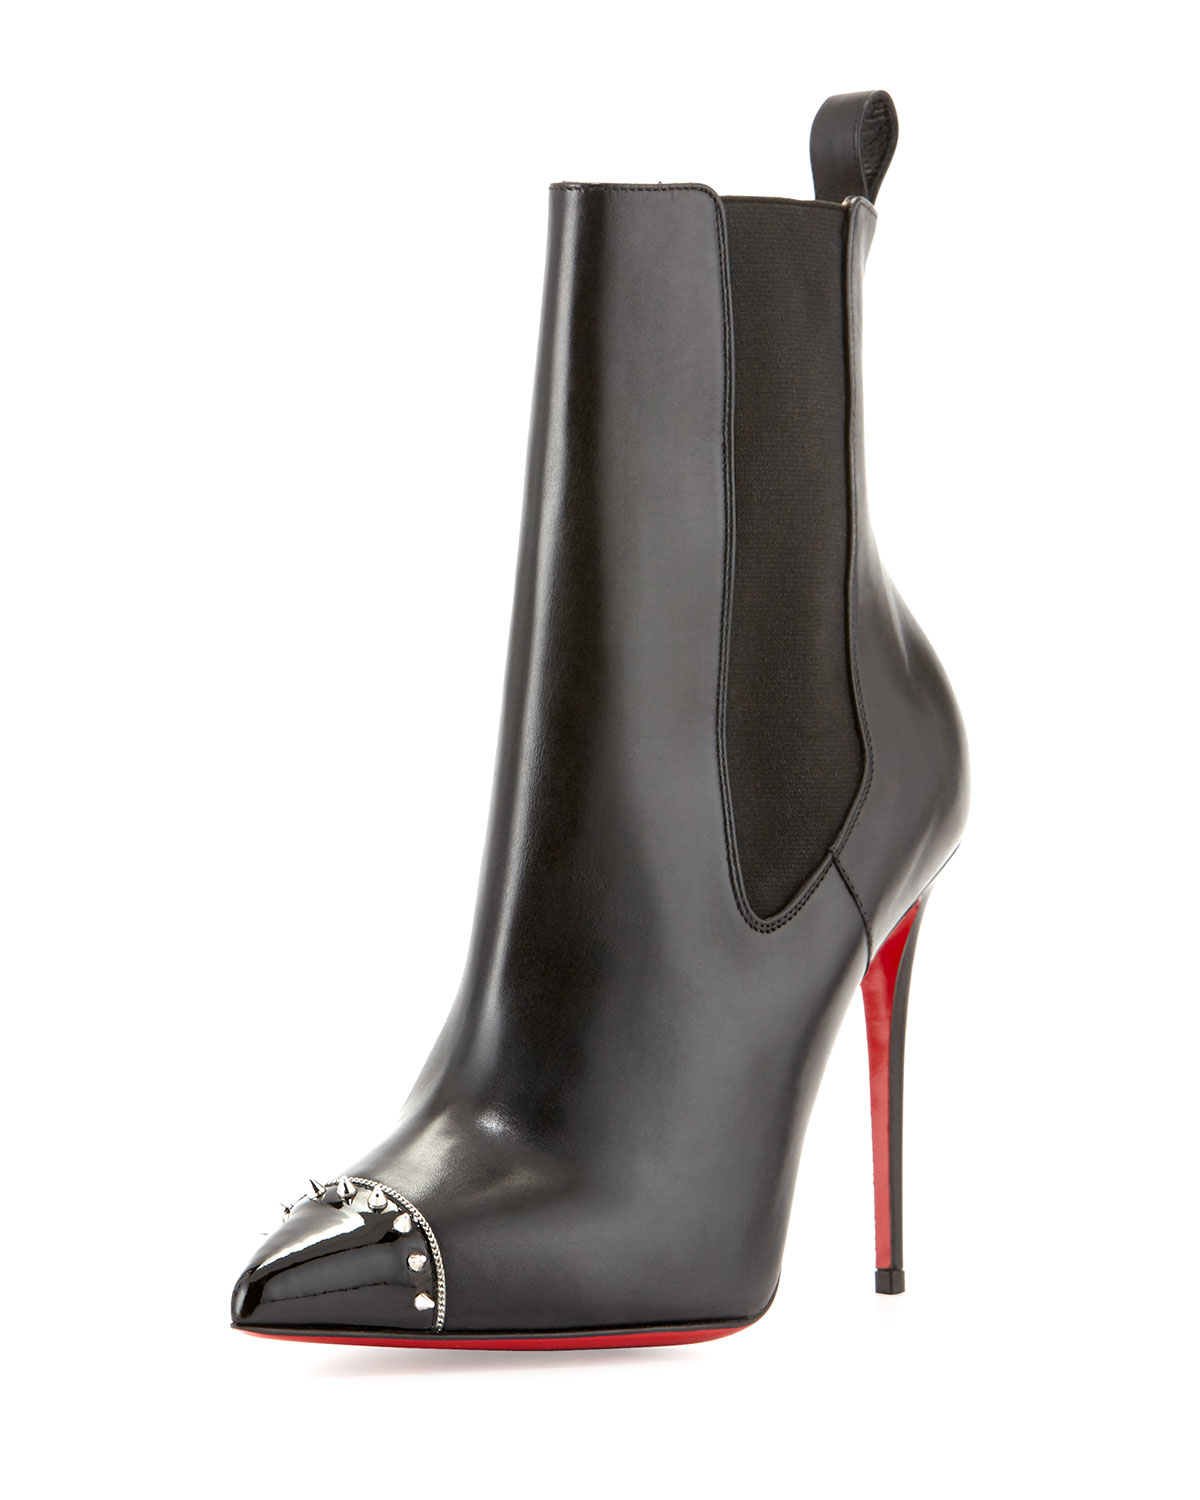 Christian louboutin Banjo Spiked Leather Boots in Black (BLACK ...